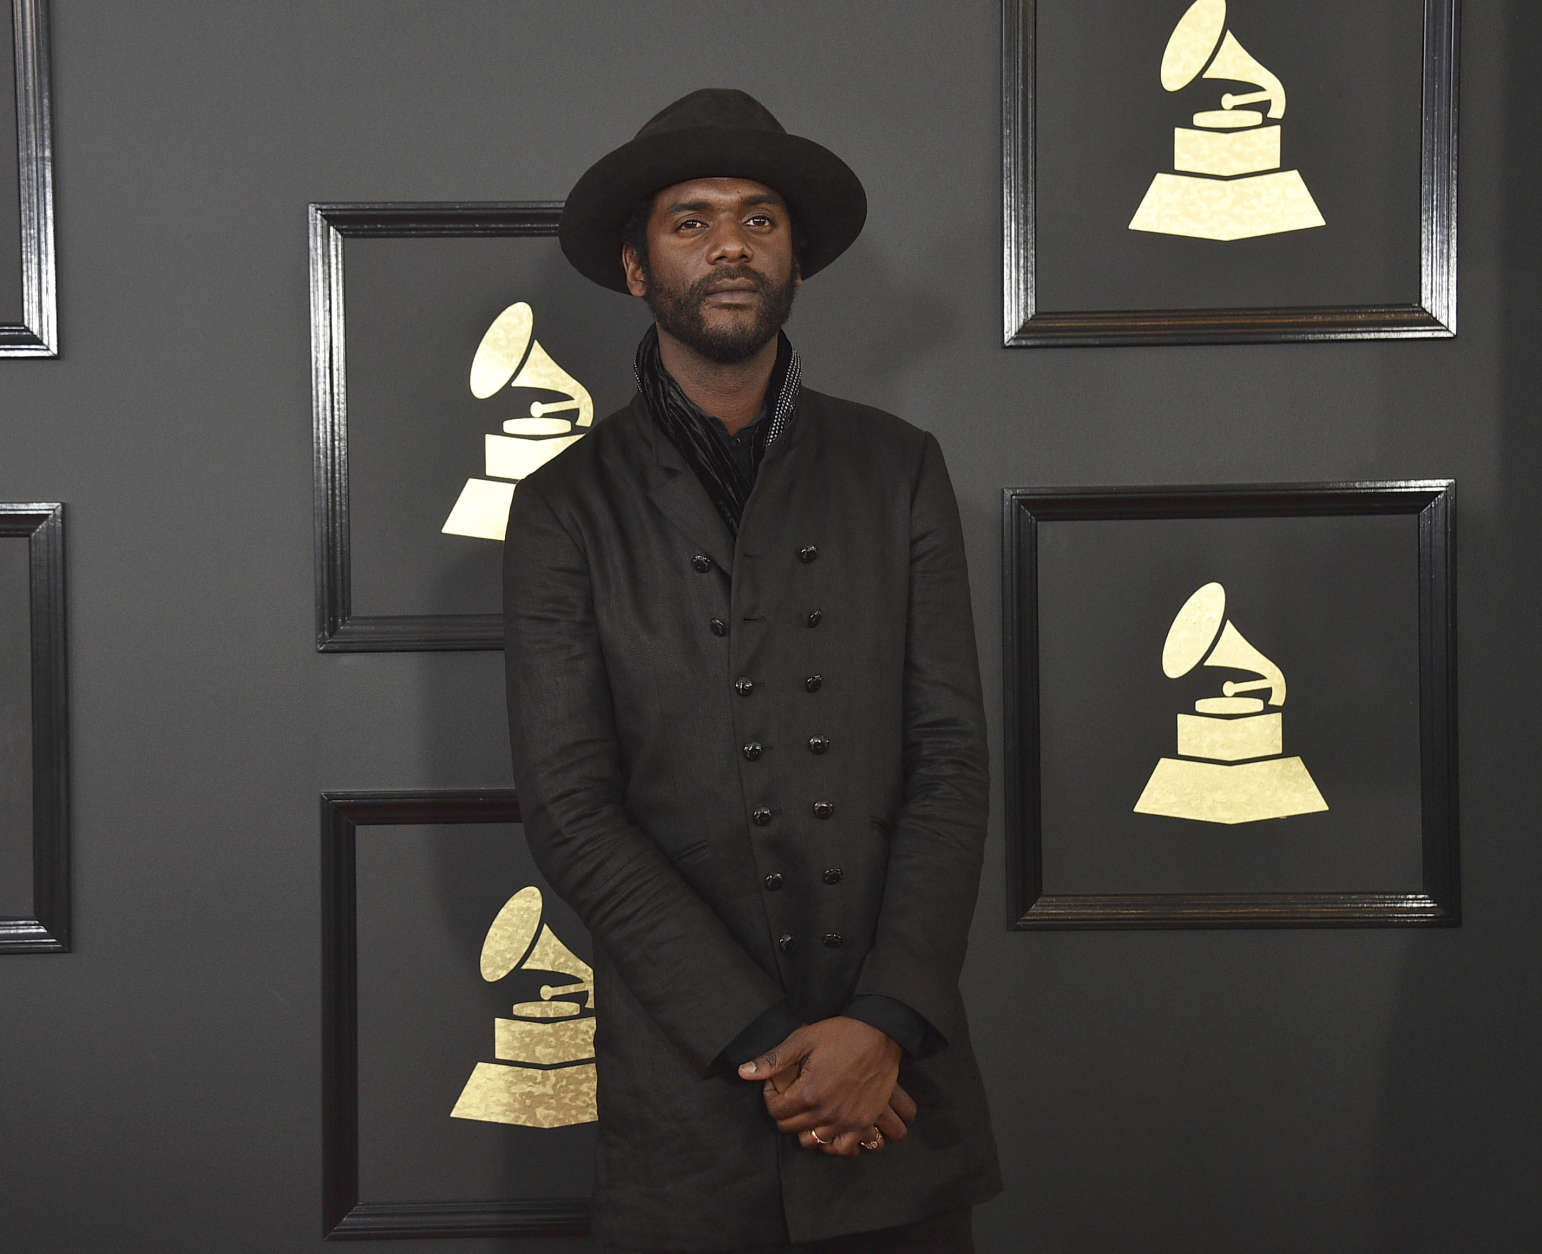 Gary Clark Jr. arrives at the 59th annual Grammy Awards at the Staples Center on Sunday, Feb. 12, 2017, in Los Angeles. (Photo by Jordan Strauss/Invision/AP)